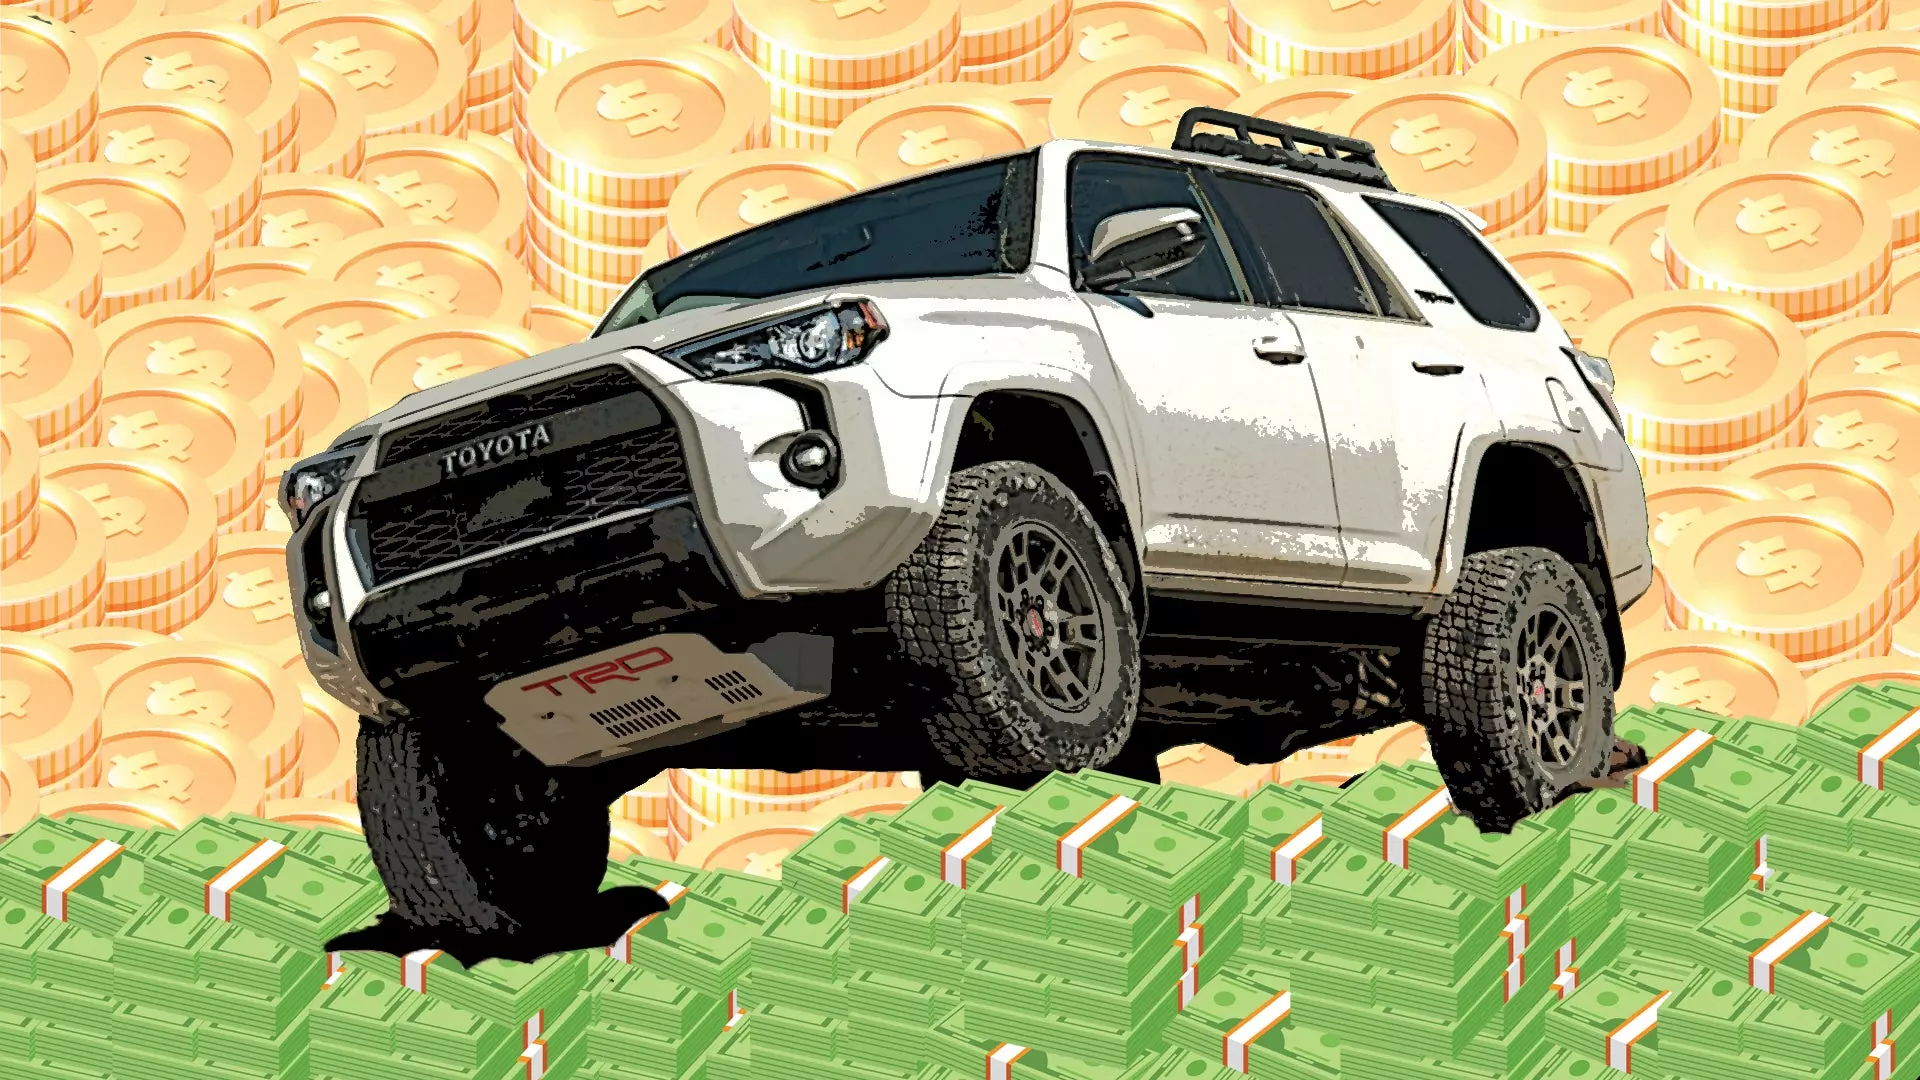 Are Y’all Really Paying $80,000 for Toyota 4Runners?